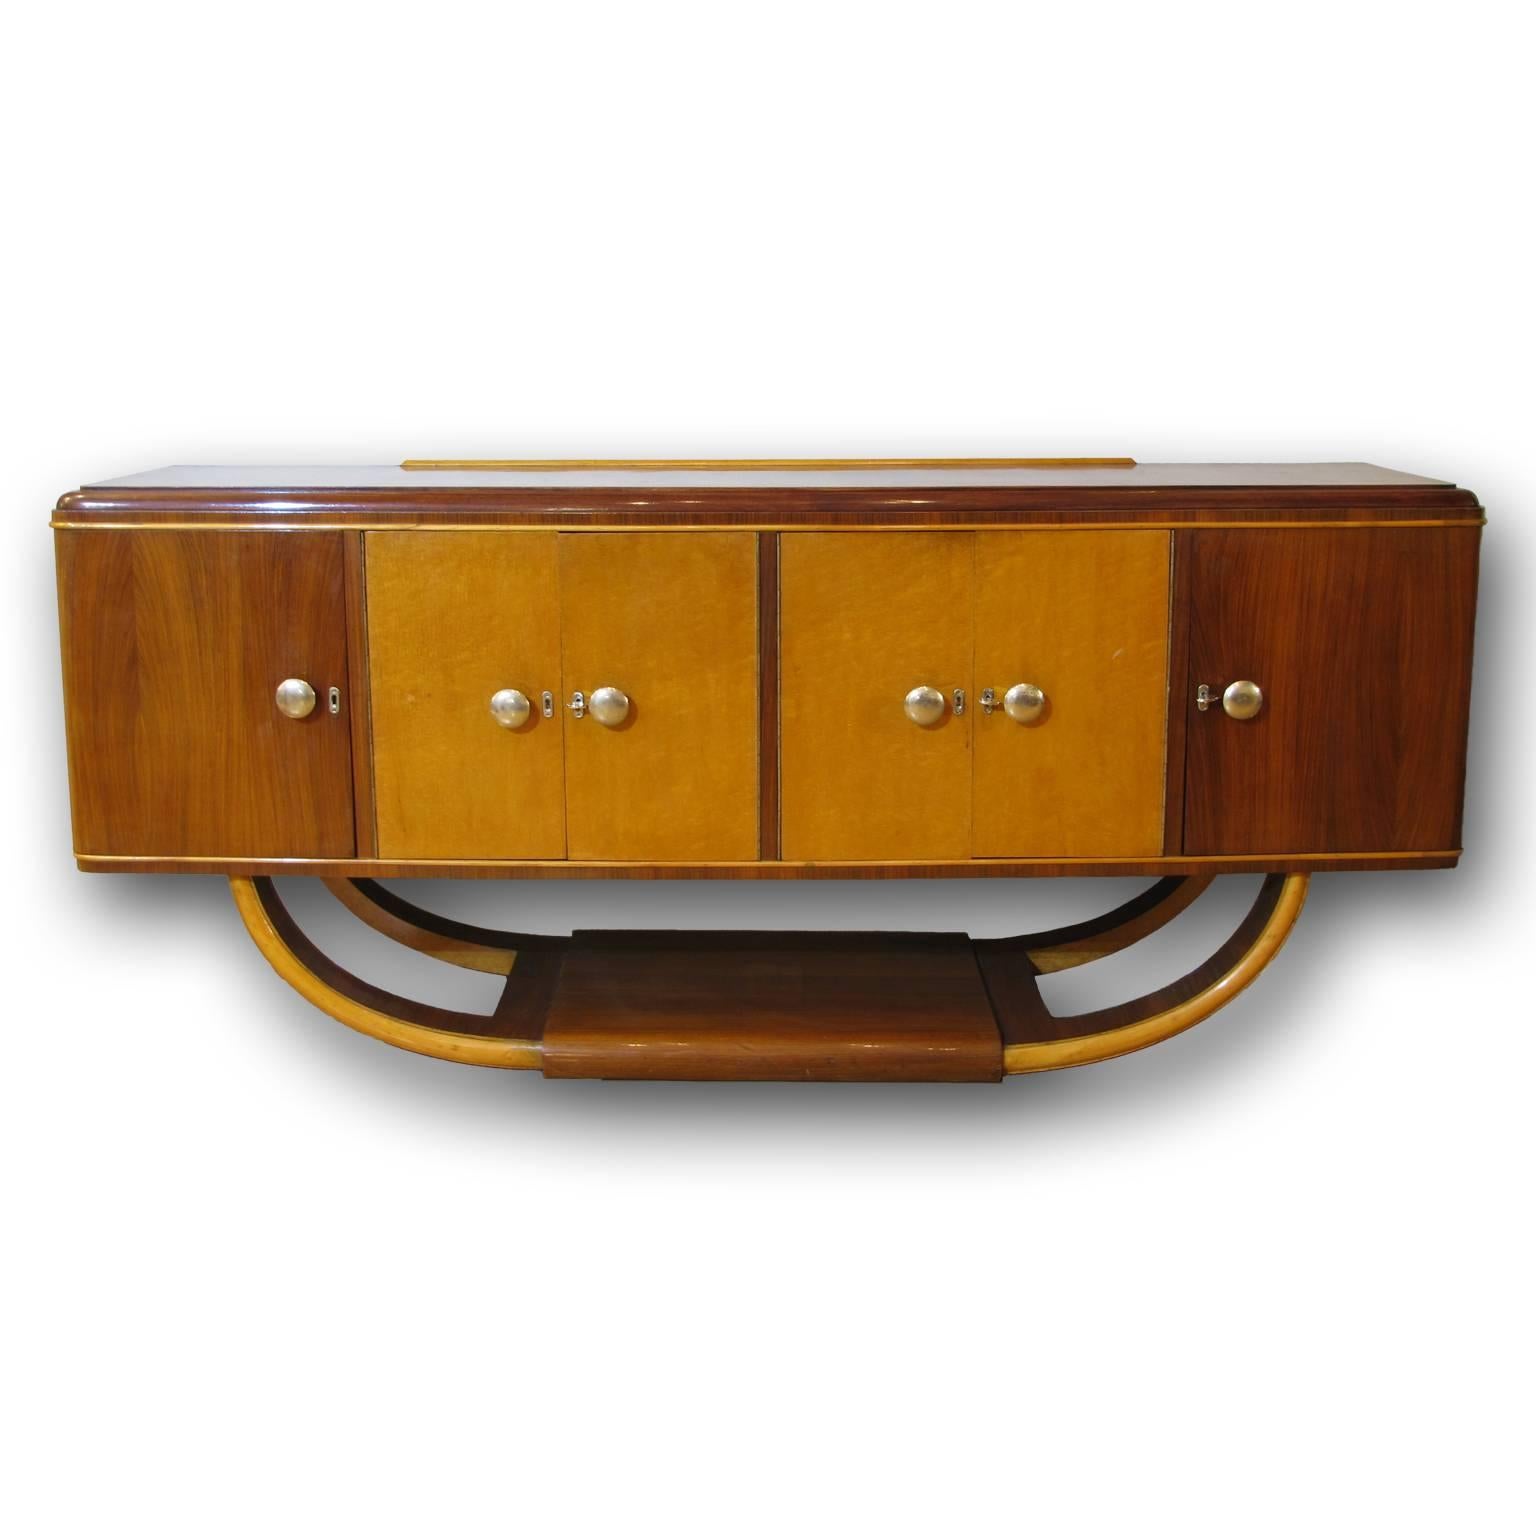 Italian Mid-20th Century Art Deco Credenza or Buffet in Palisander and Maple 1